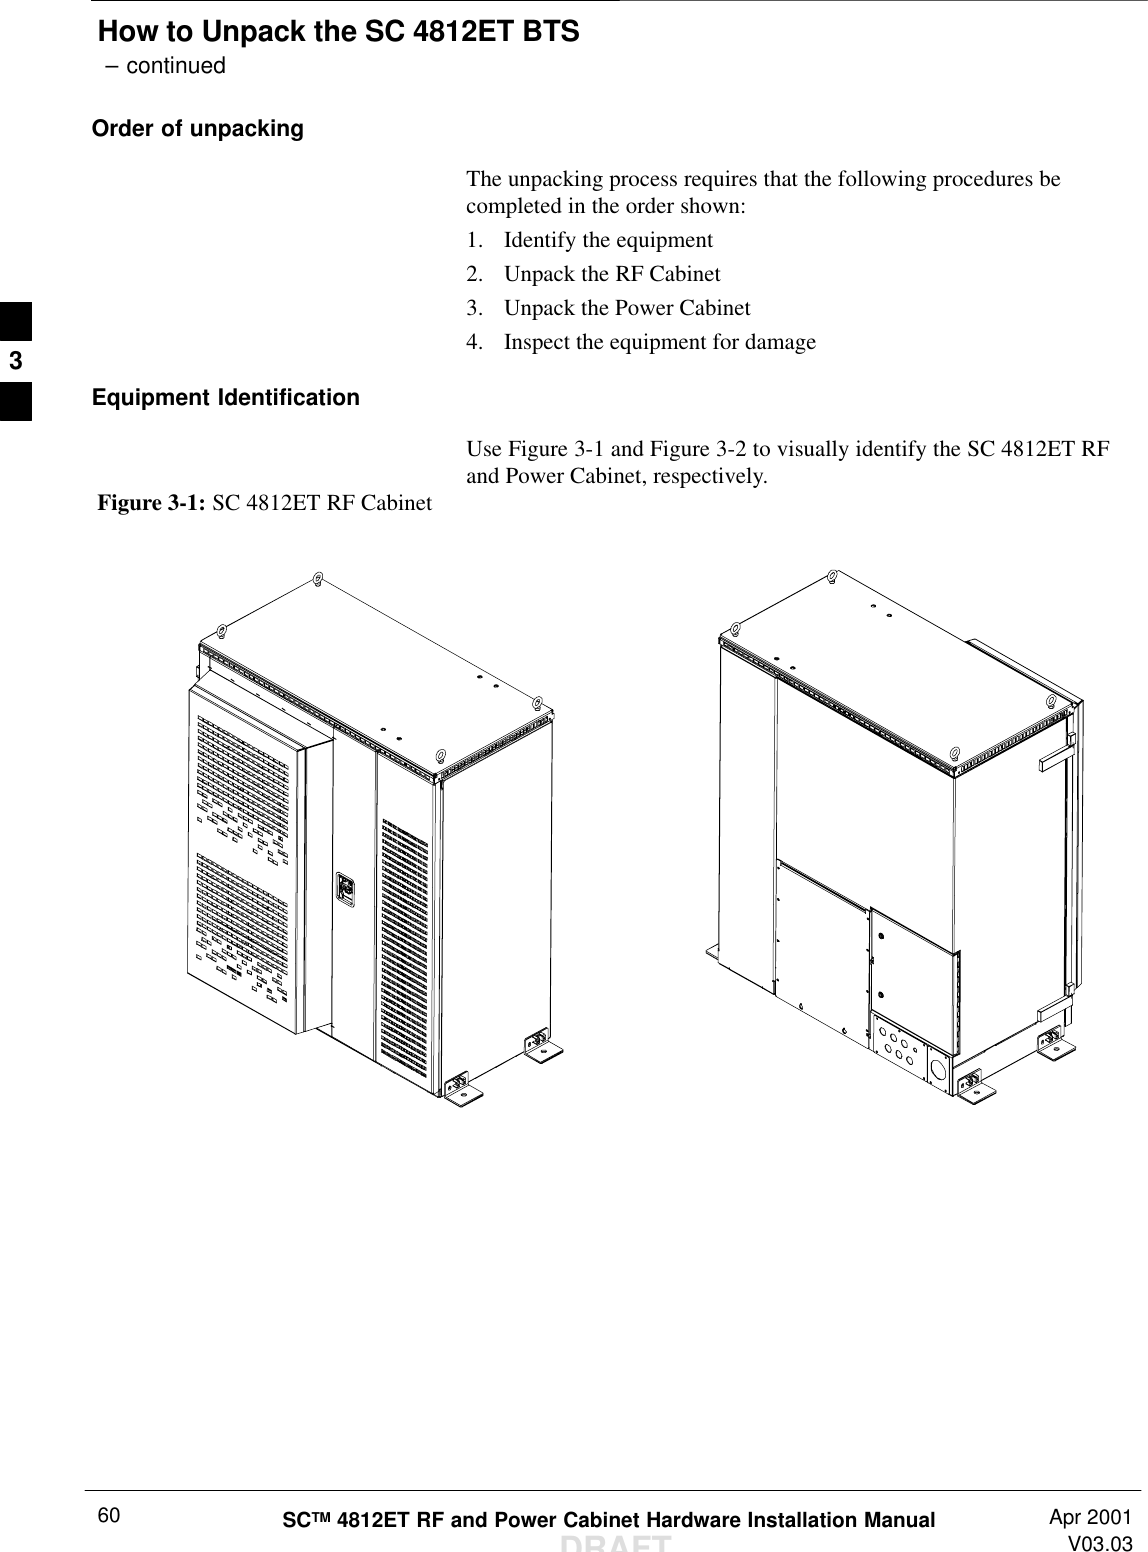 How to Unpack the SC 4812ET BTS – continuedDRAFTSCTM 4812ET RF and Power Cabinet Hardware Installation Manual Apr 2001V03.0360Order of unpackingThe unpacking process requires that the following procedures becompleted in the order shown:1. Identify the equipment2. Unpack the RF Cabinet3. Unpack the Power Cabinet4. Inspect the equipment for damageEquipment IdentificationUse Figure 3-1 and Figure 3-2 to visually identify the SC 4812ET RFand Power Cabinet, respectively.Figure 3-1: SC 4812ET RF Cabinet3